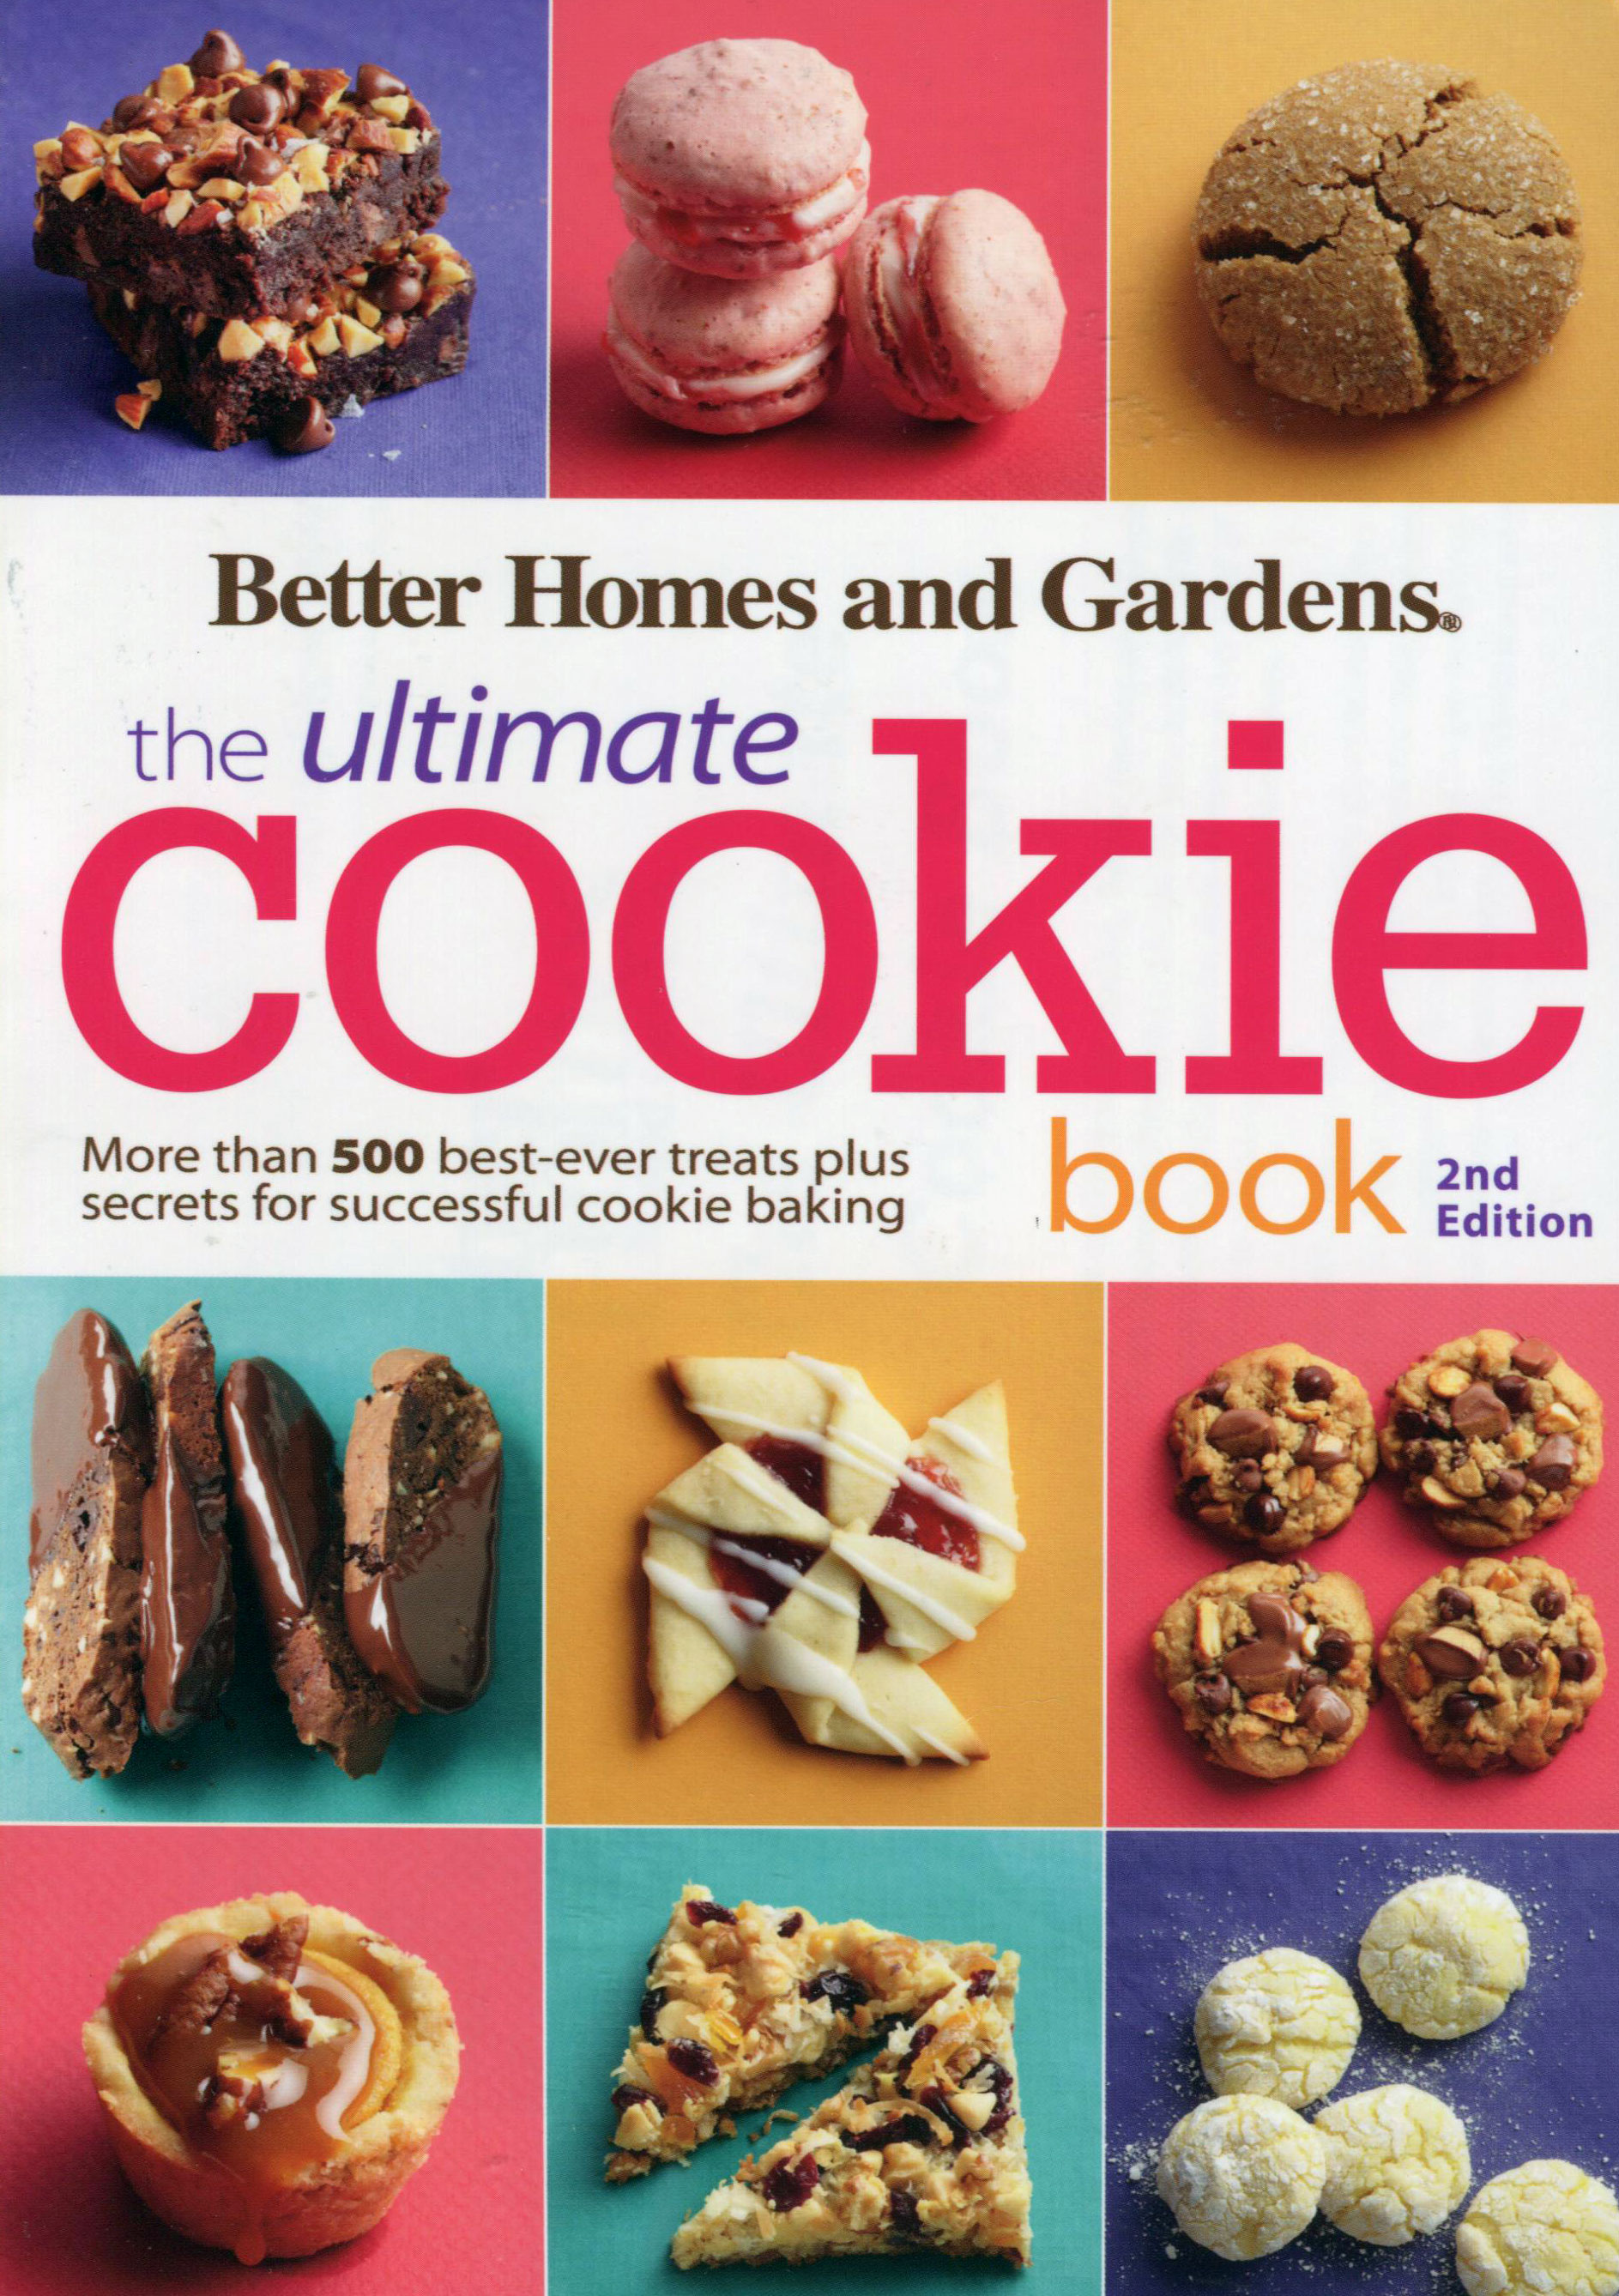 TBT Cookbook Review: The Ultimate Cookie Book